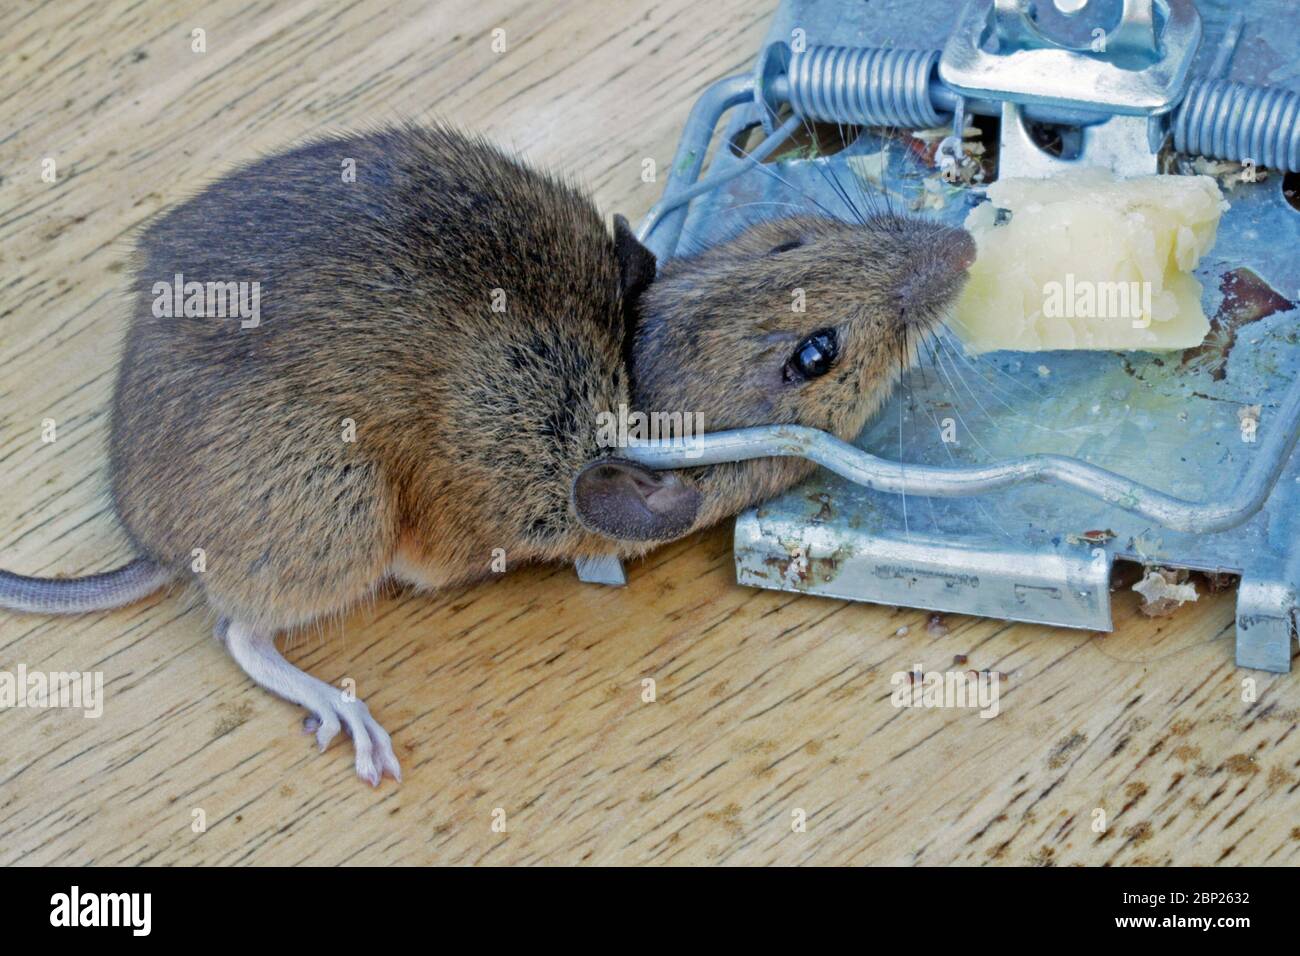 Mouse killed in a metal mouse trap. Stock Photo